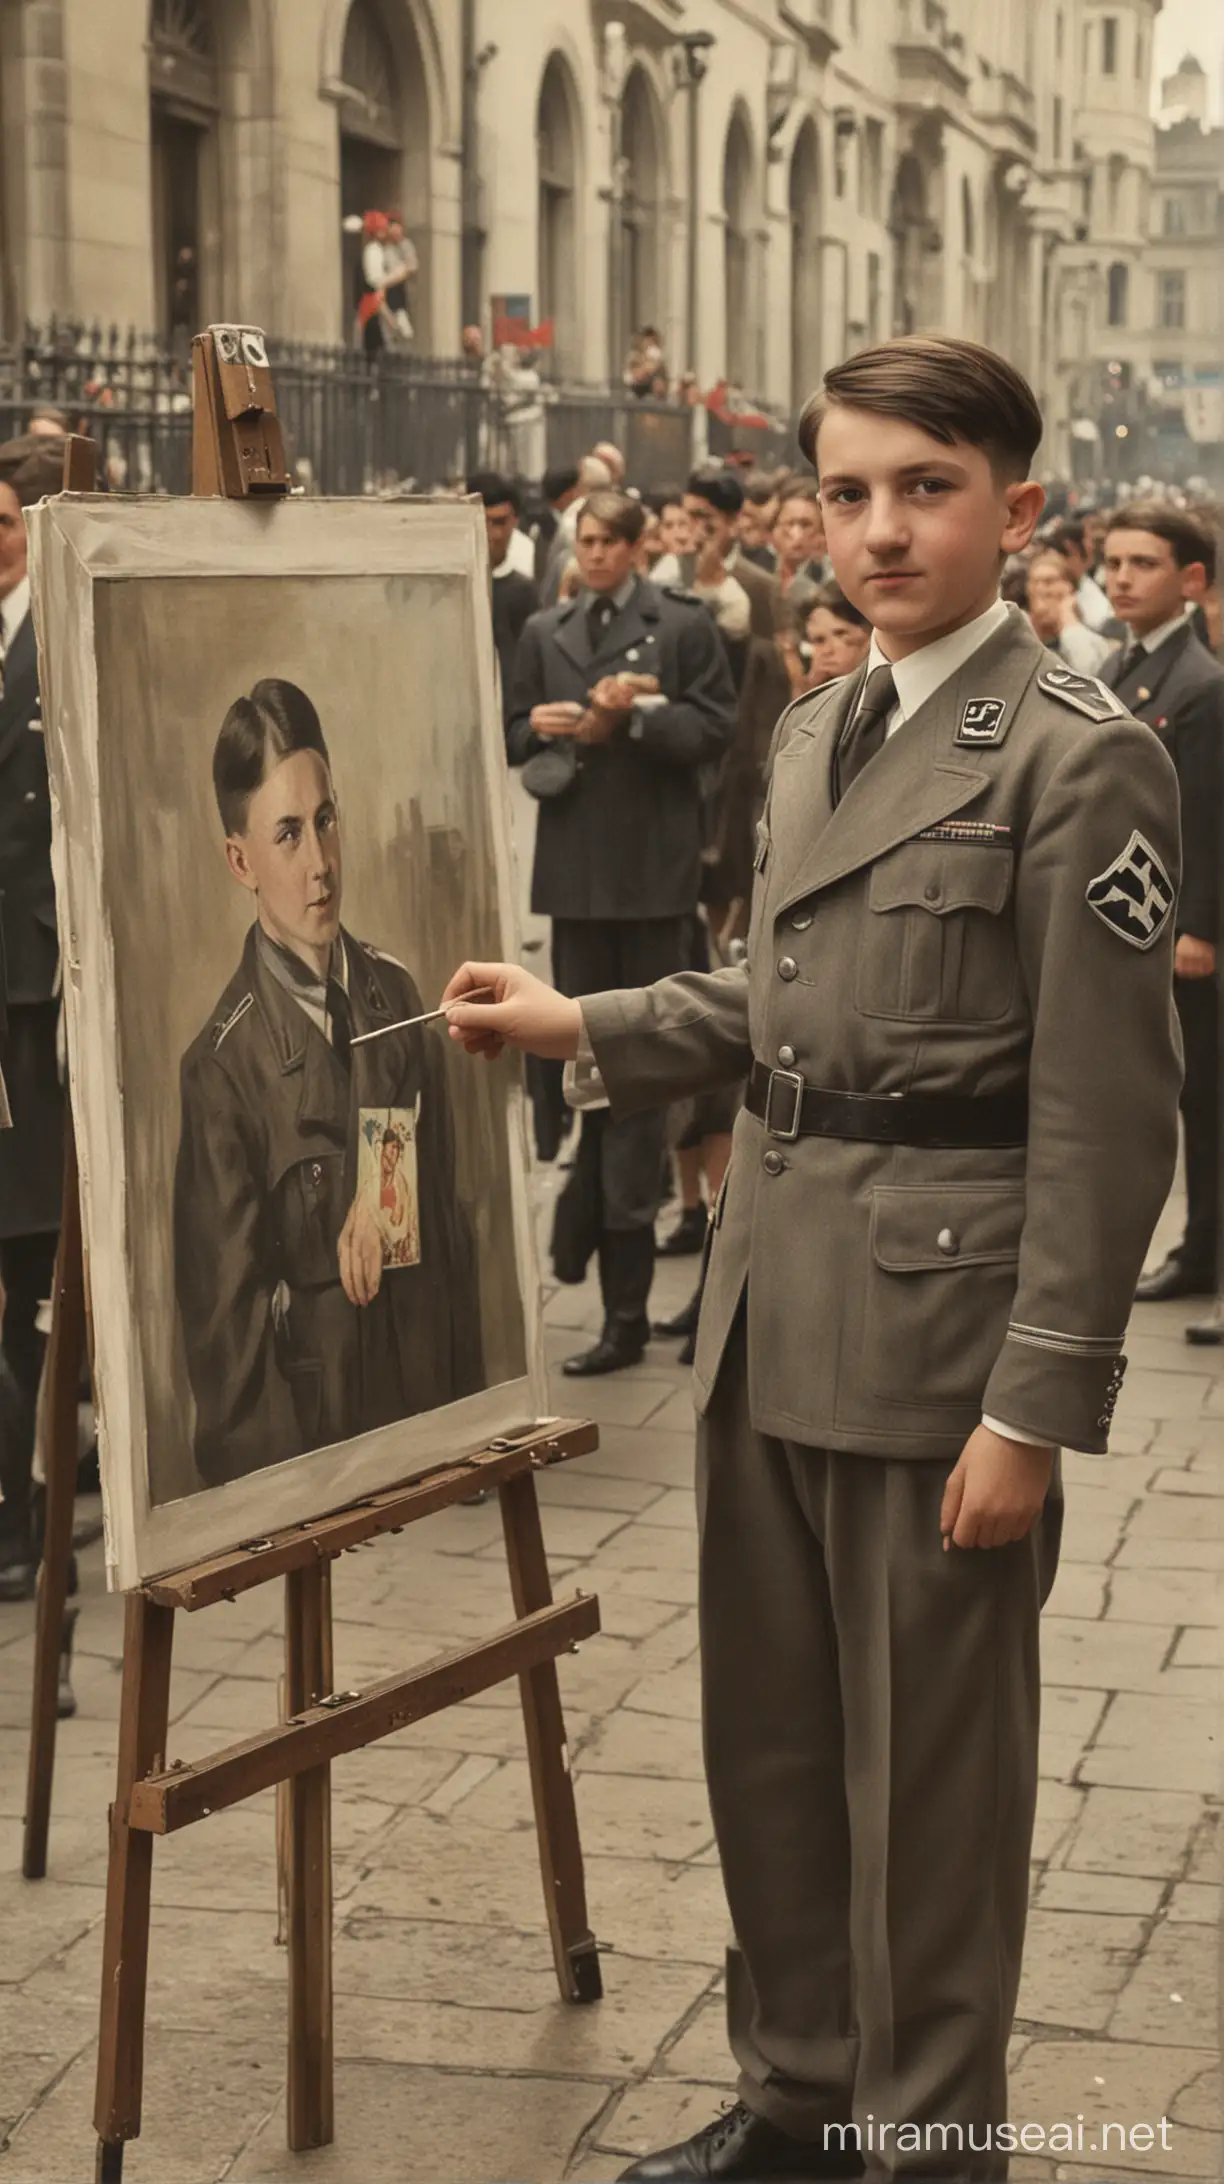 In 20th century, an Austrian boy Hitler  selling paintings in Vienna 